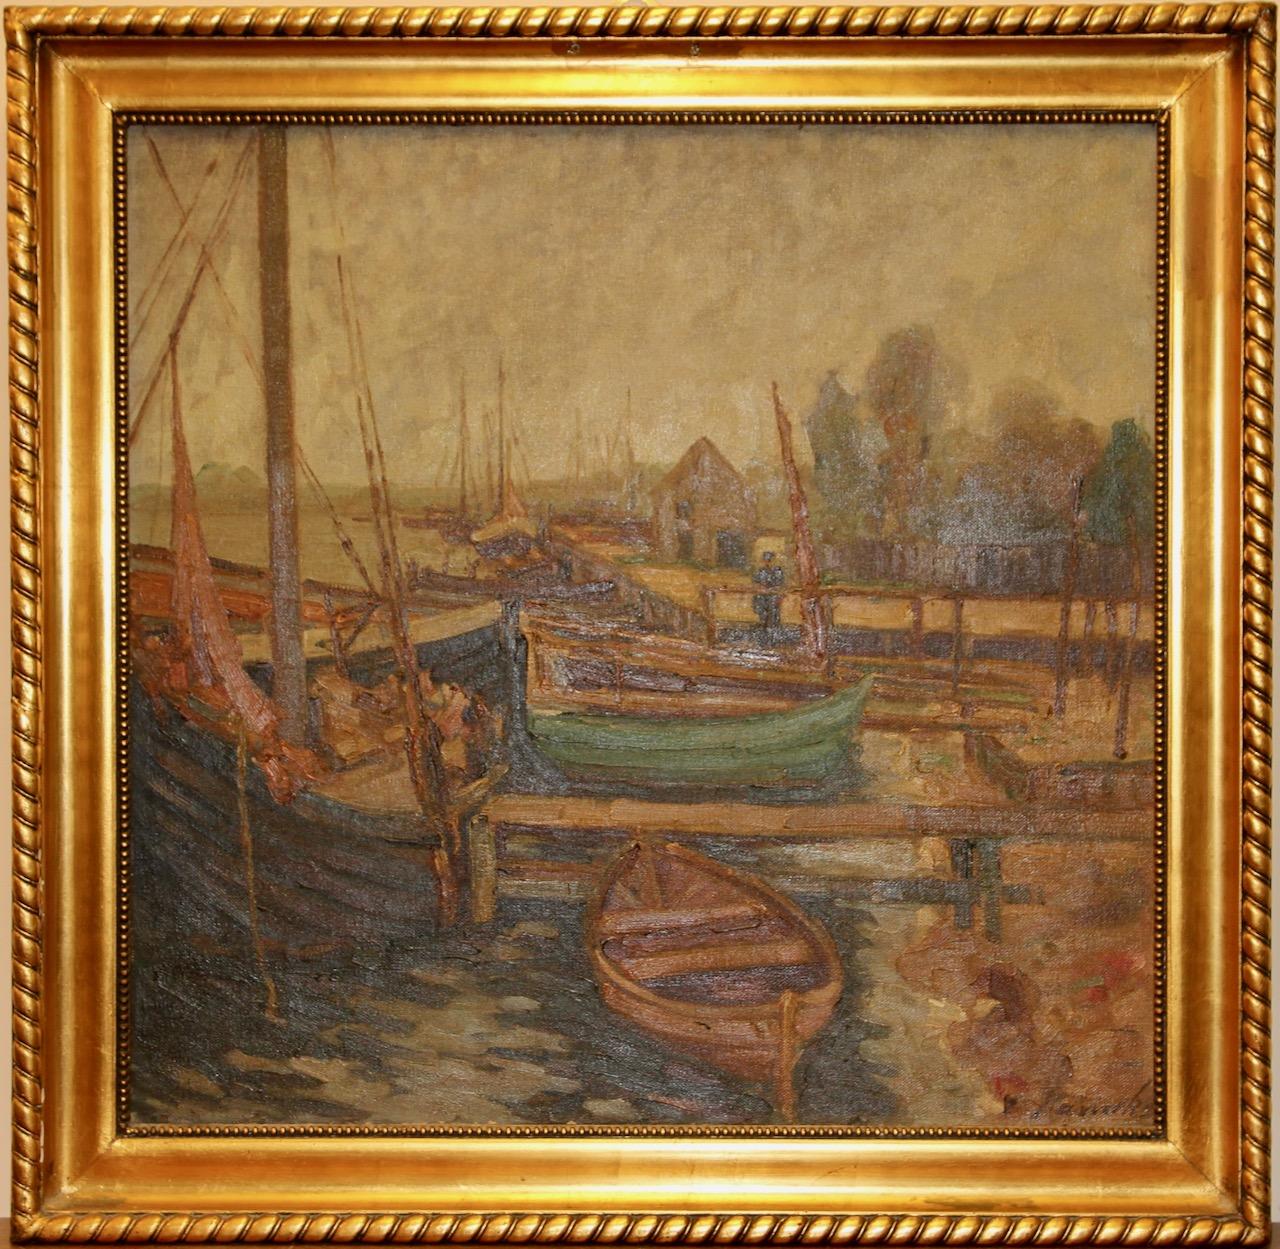 Antique Oil Painting by Egon von Kameke, "Boat Dock"

Dimensions measured with frame.

Including certificate of authenticity.